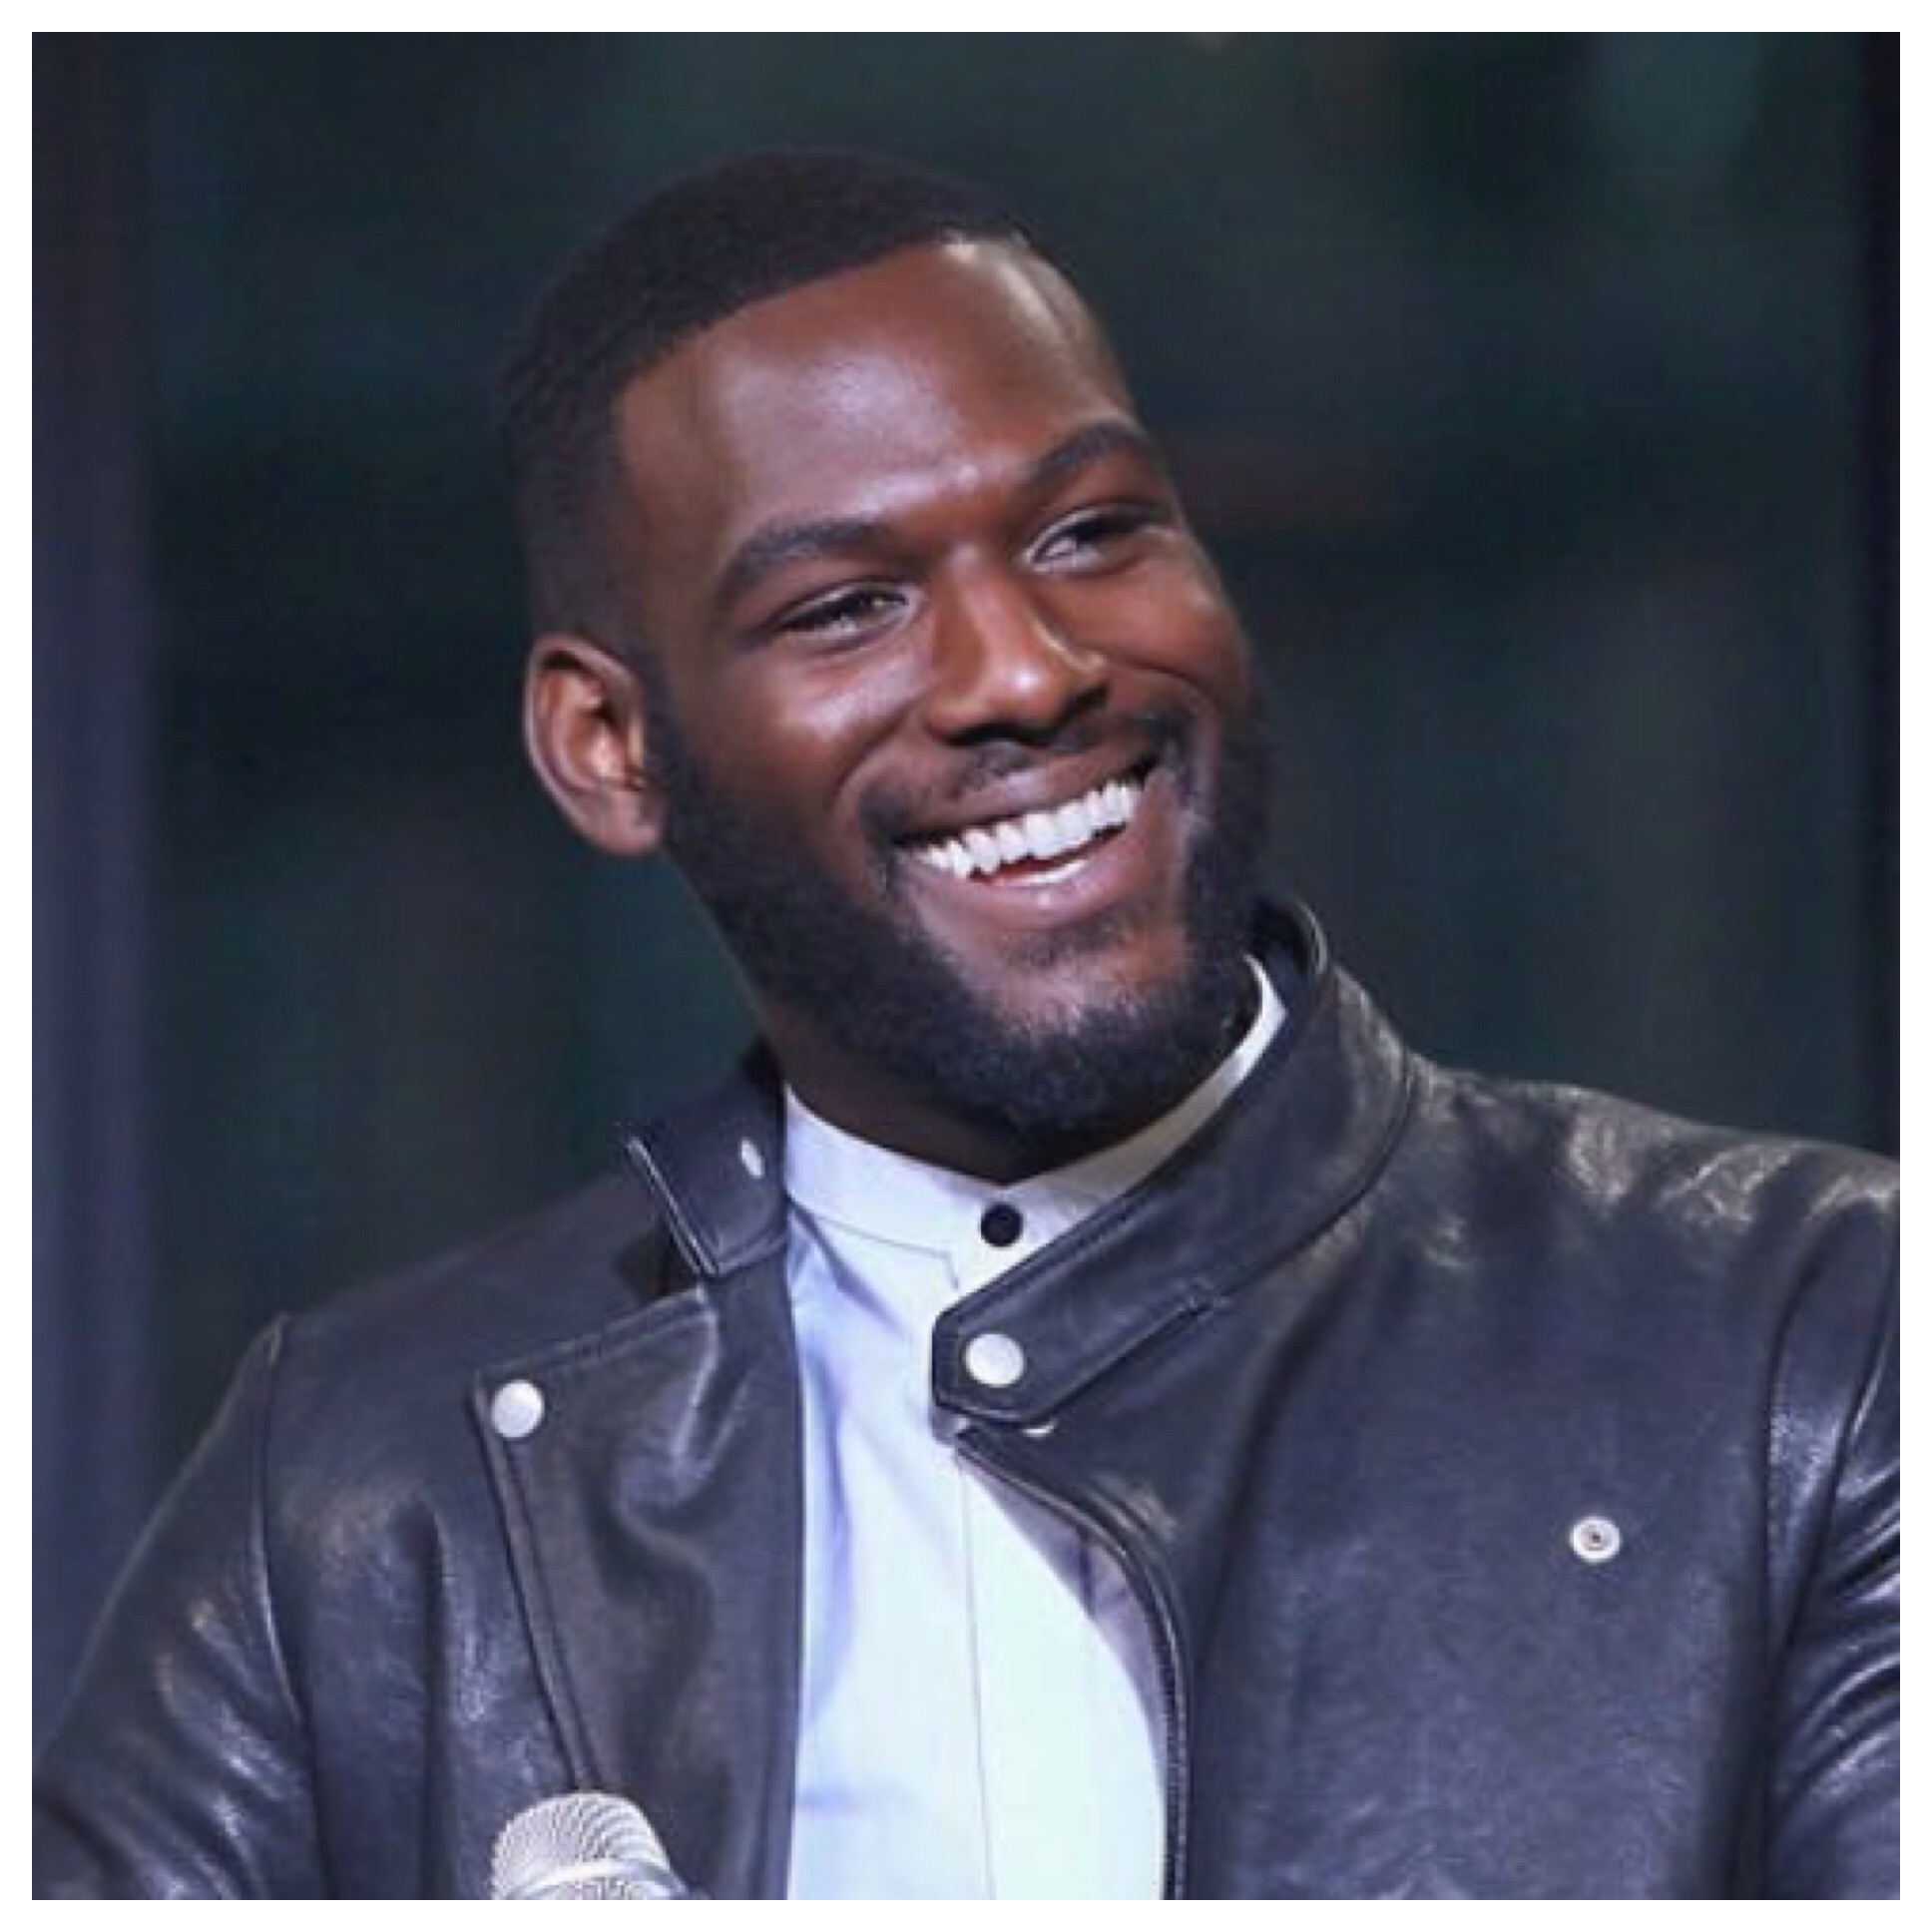 Queen Sugar Breakout Star Kofi Siriboe Is Attacked On Social Media After Saying “Nobody Will Ride For You Like A Black Woman.”